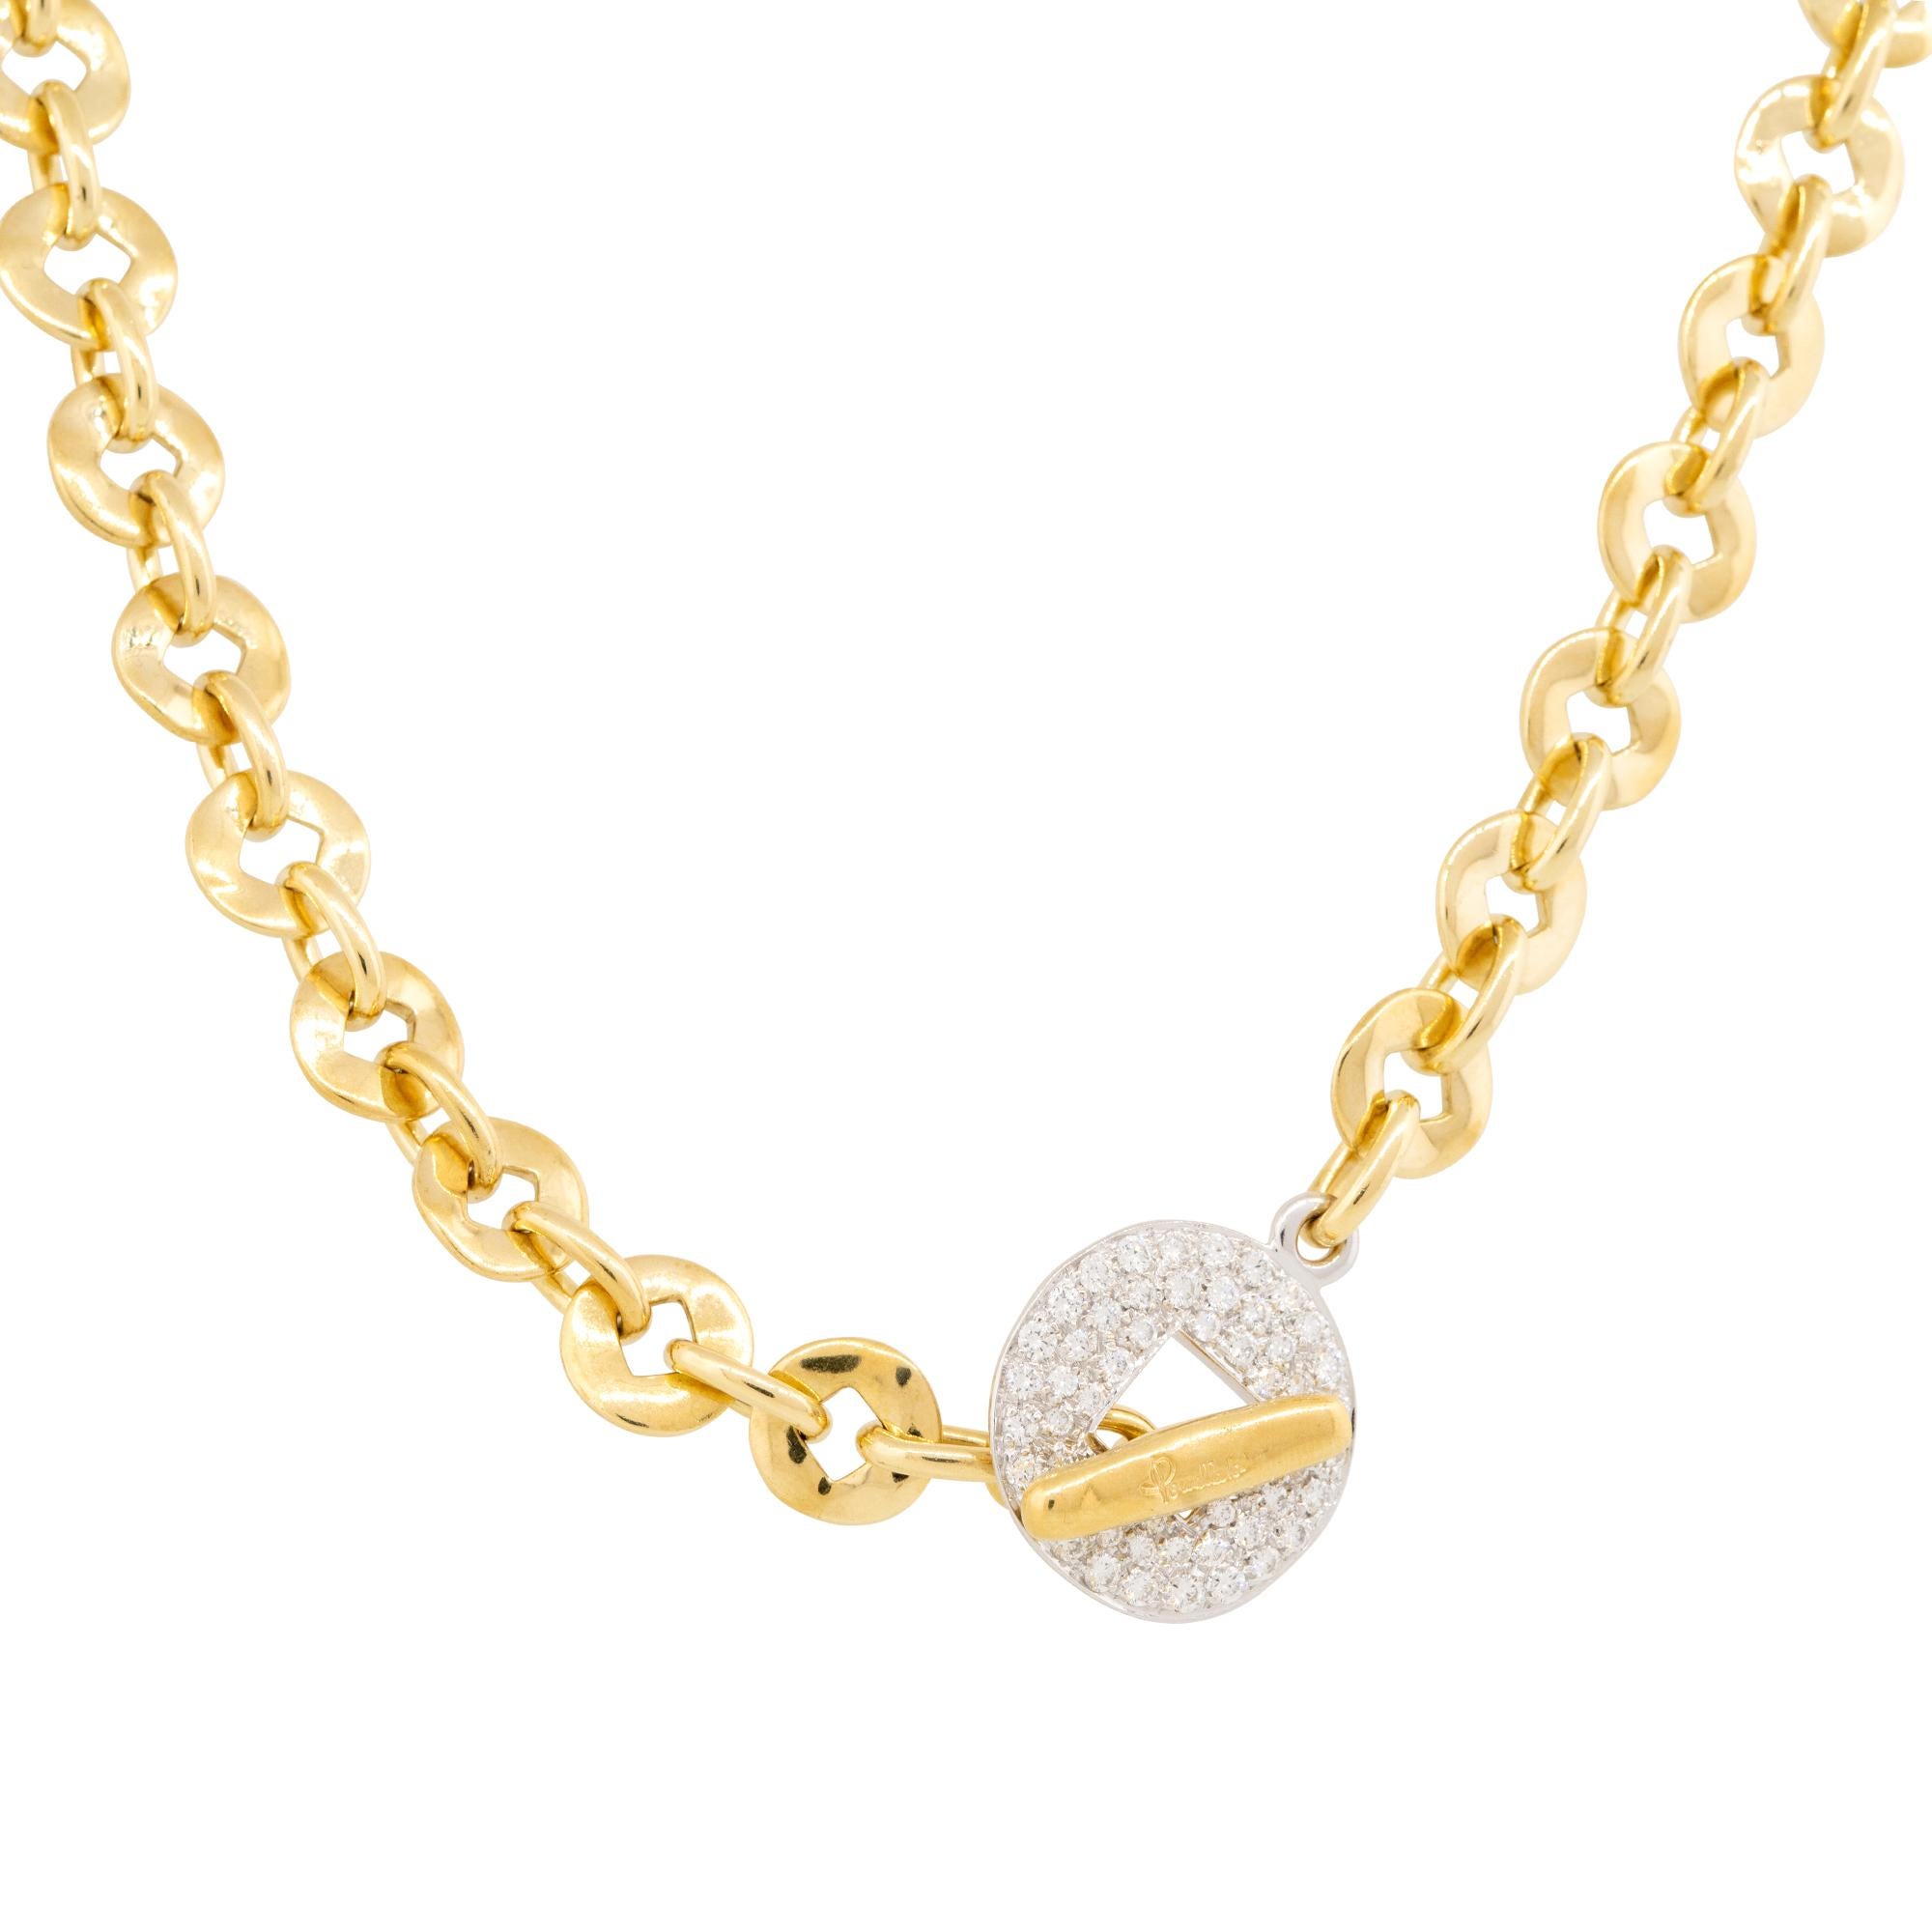 With 1 carat of near colorless diamonds, this beautiful diamond disk chain necklace shines from a mile away. This necklace consists of 1 diamond set round disk and is set in 18 karat yellow gold. This necklace gives off a big look and would make an